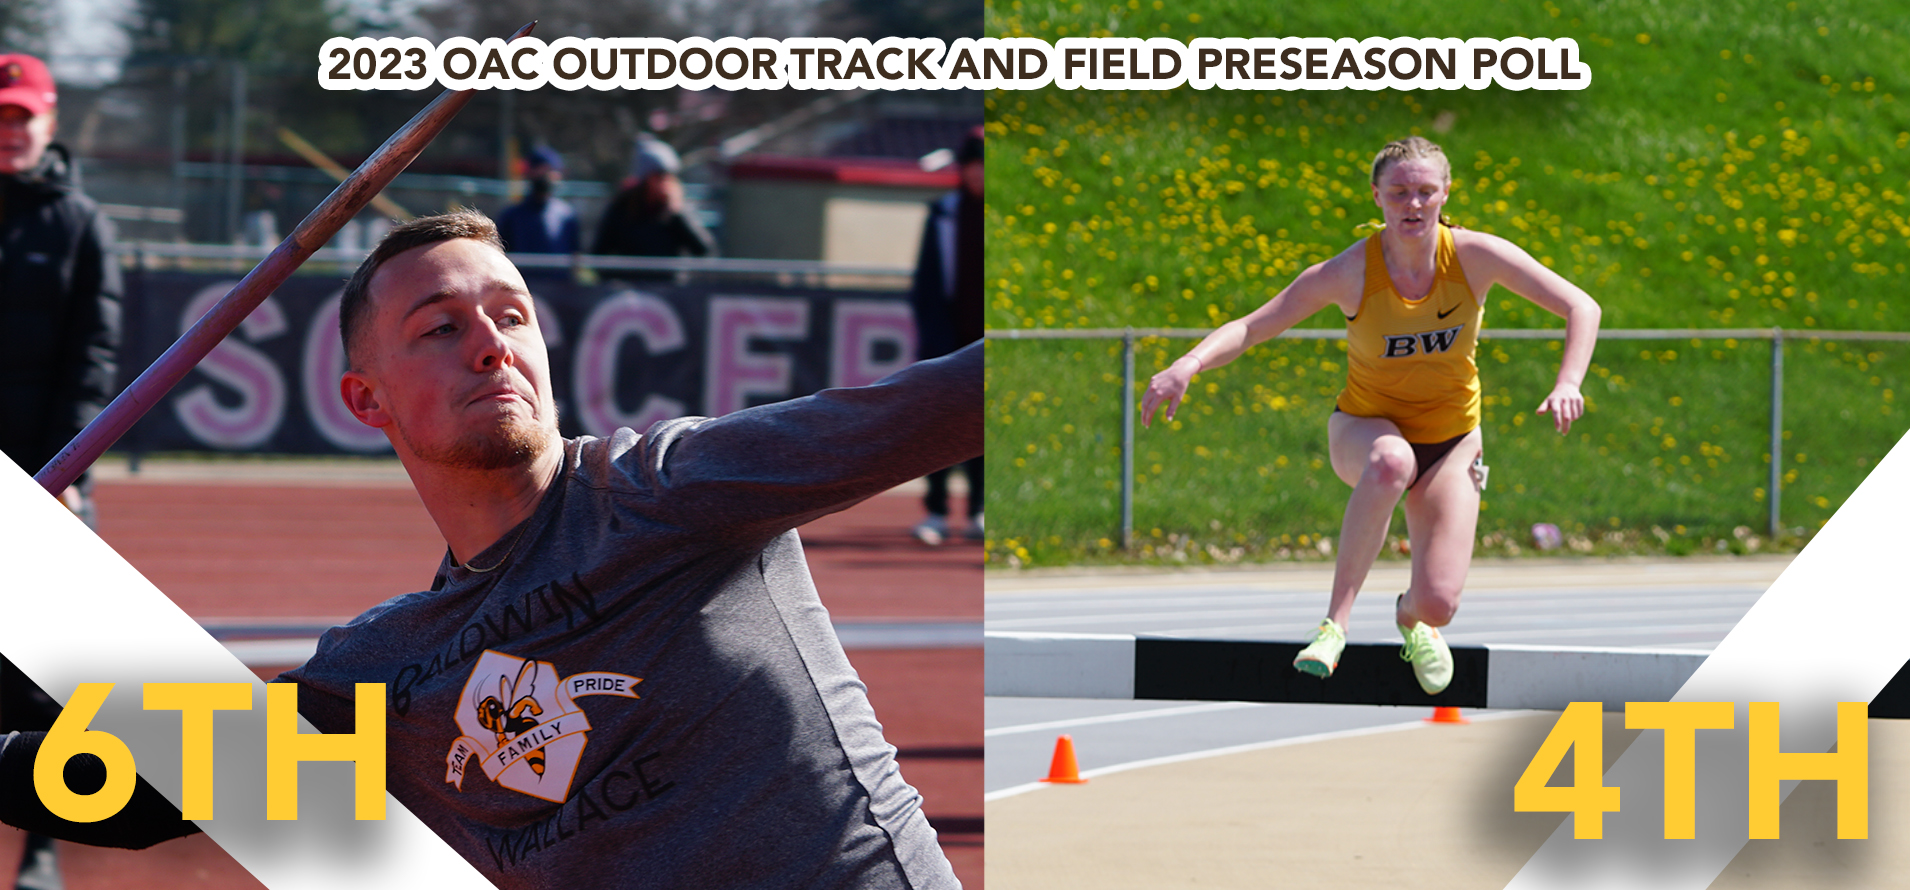 Women Selected Fourth, Men Tabbed Sixth in 2023 OAC Outdoor Track and Field Preseason Poll